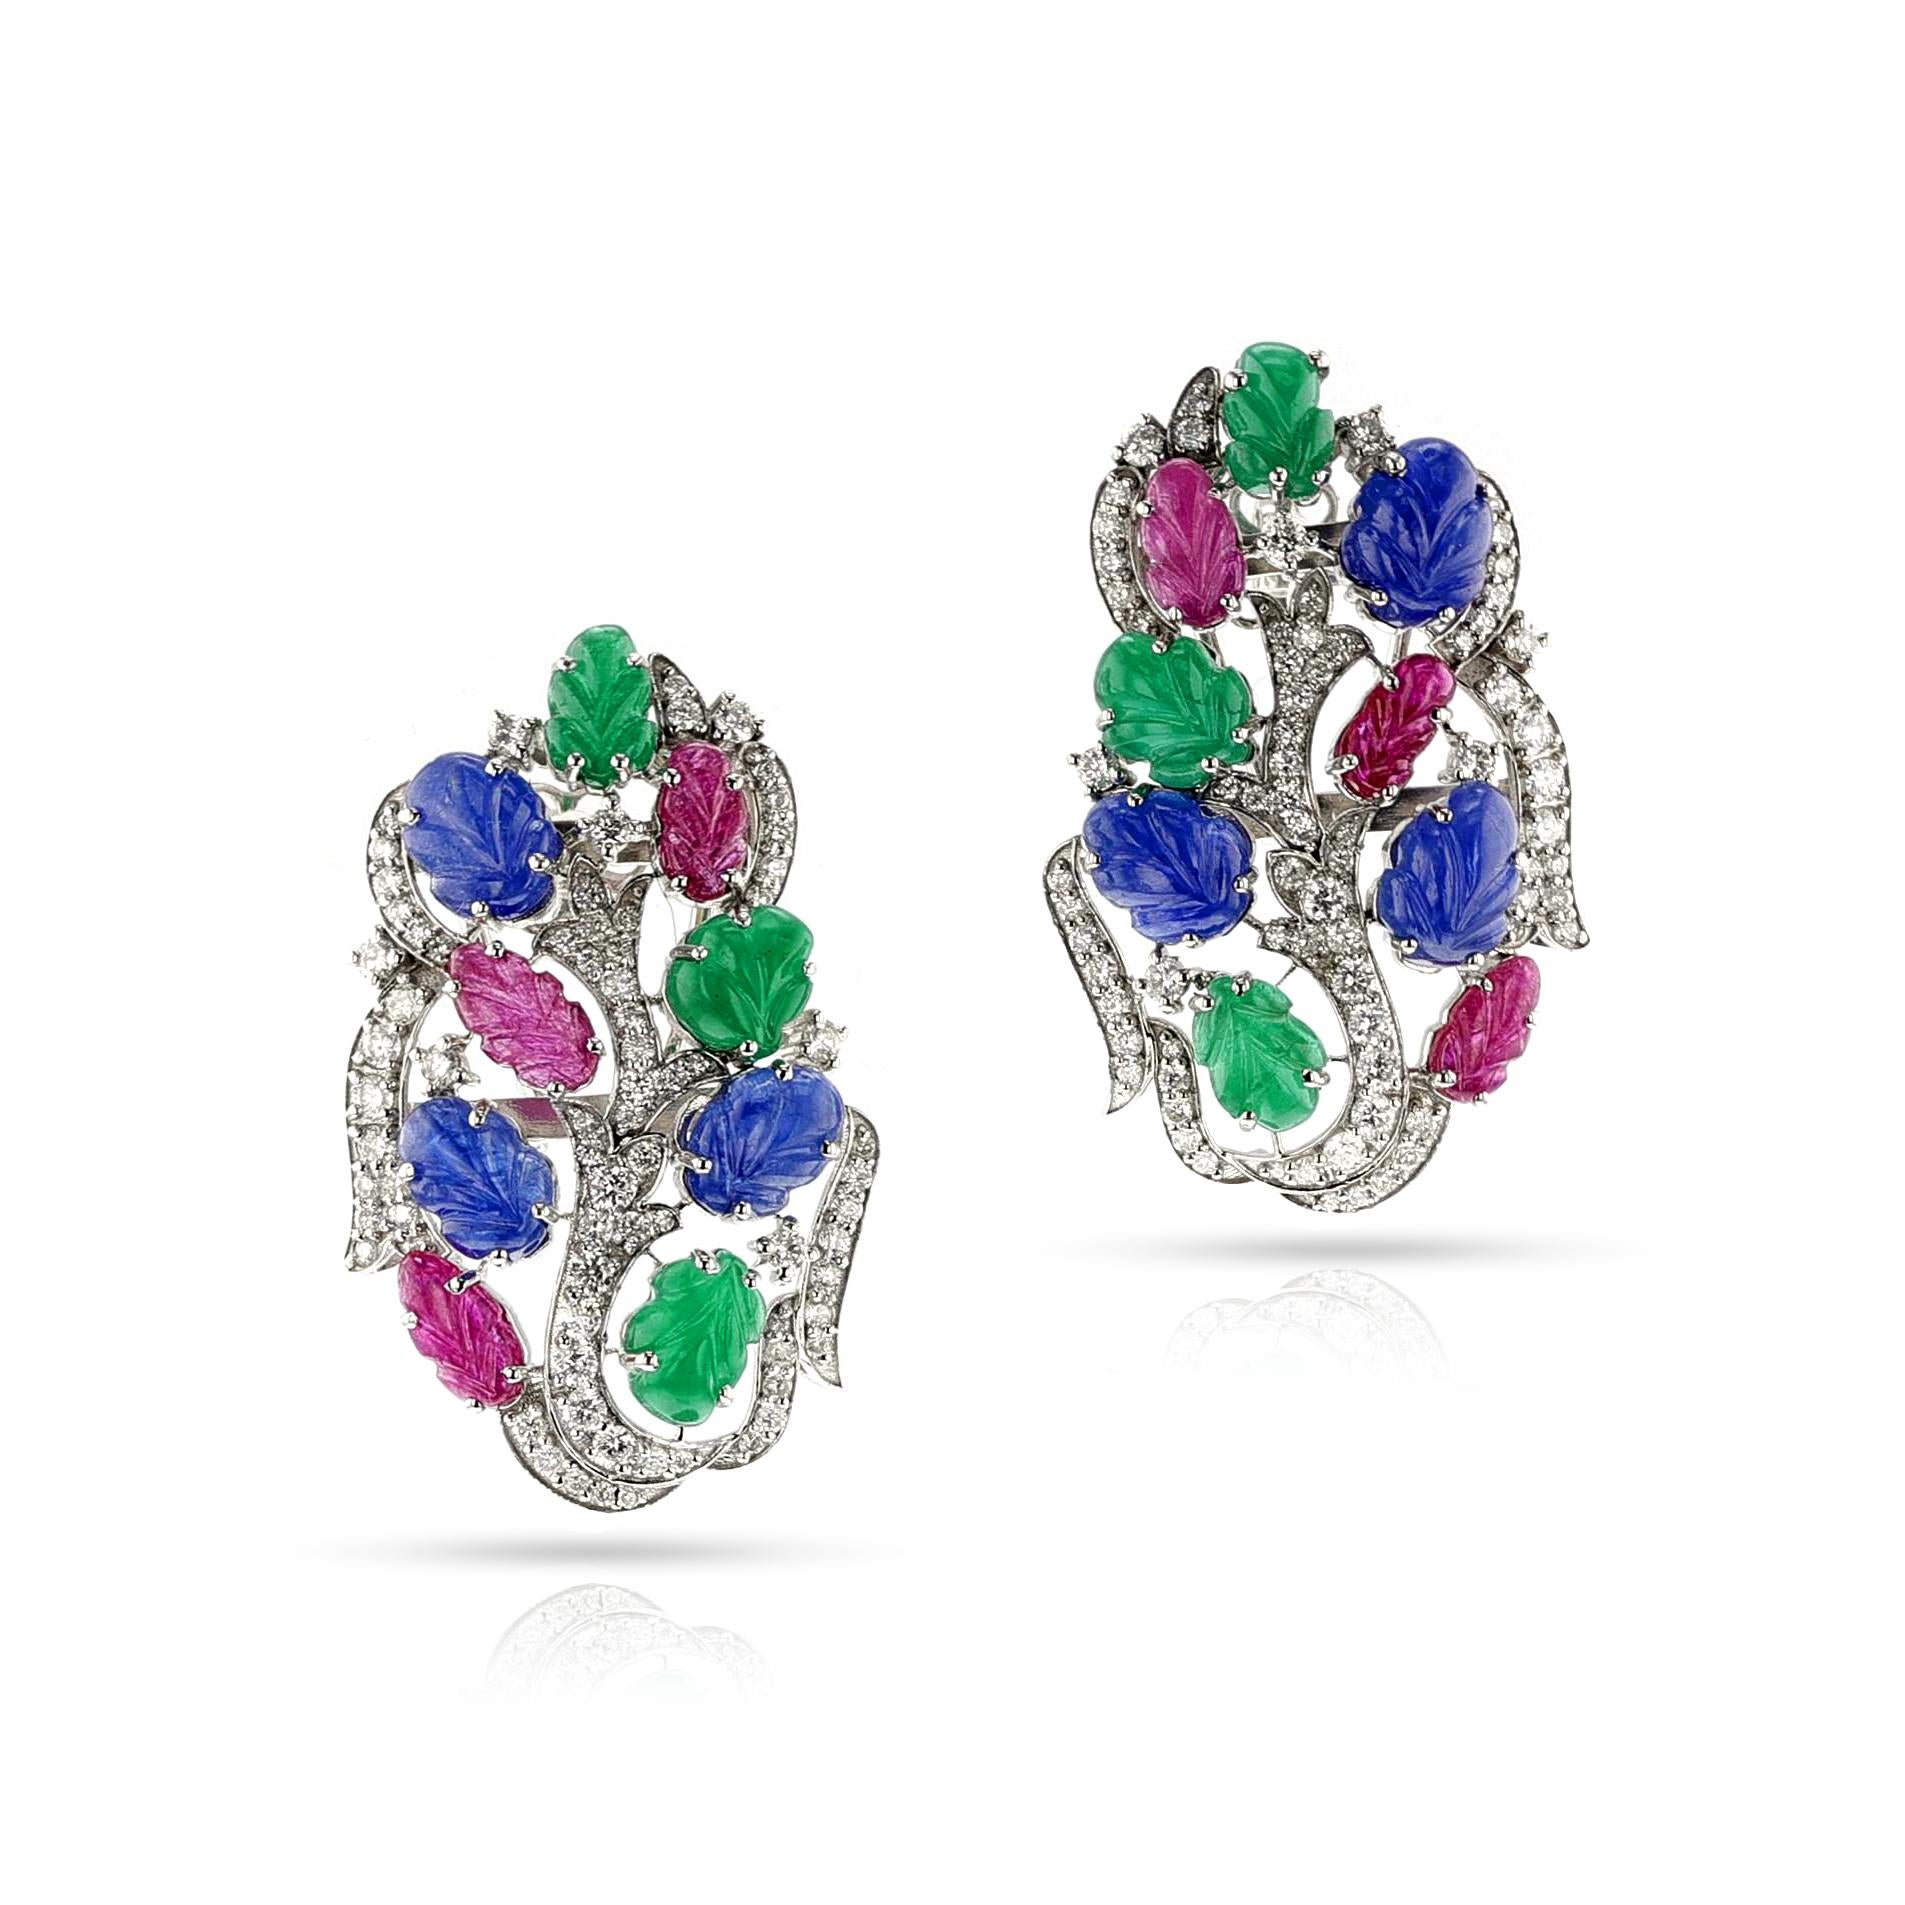 A pair of Ruby, Emerald, Sapphire Carved Leaves with Diamond Earrings, 18k White Gold. The carvings weigh appx. 19 carats and the diamonds weigh appx. 2 carats. The total weight is 19.56 grams. The dimensions are 1.75 inch x 1 inch. A unique and